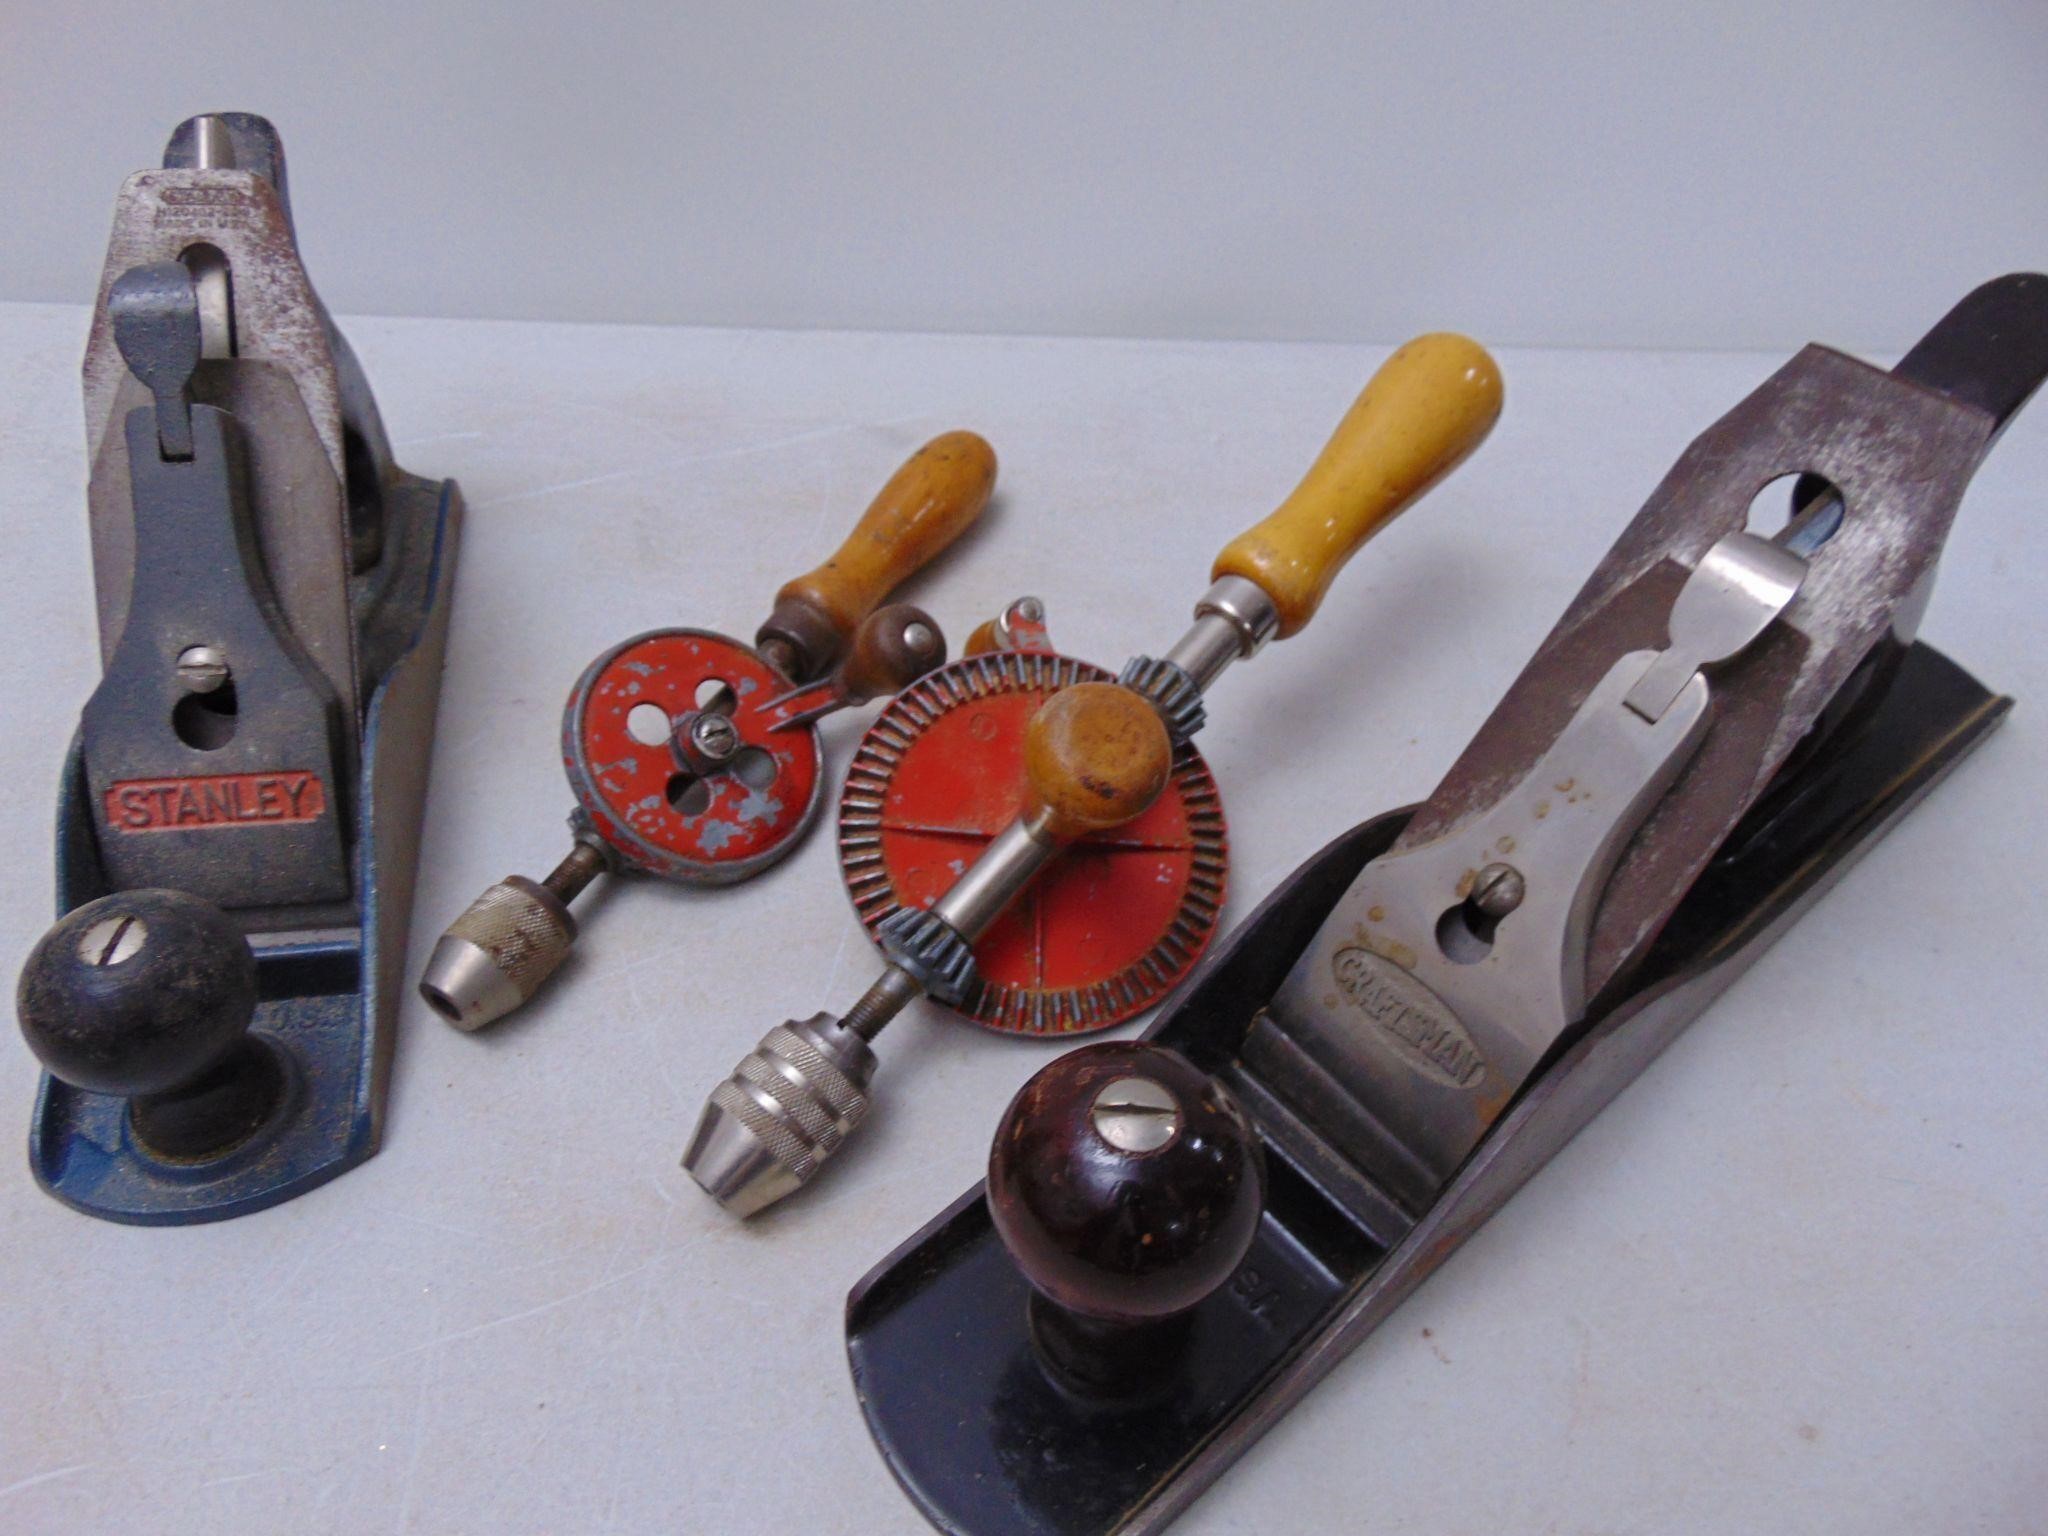 Vintage Hand Drills and Planes